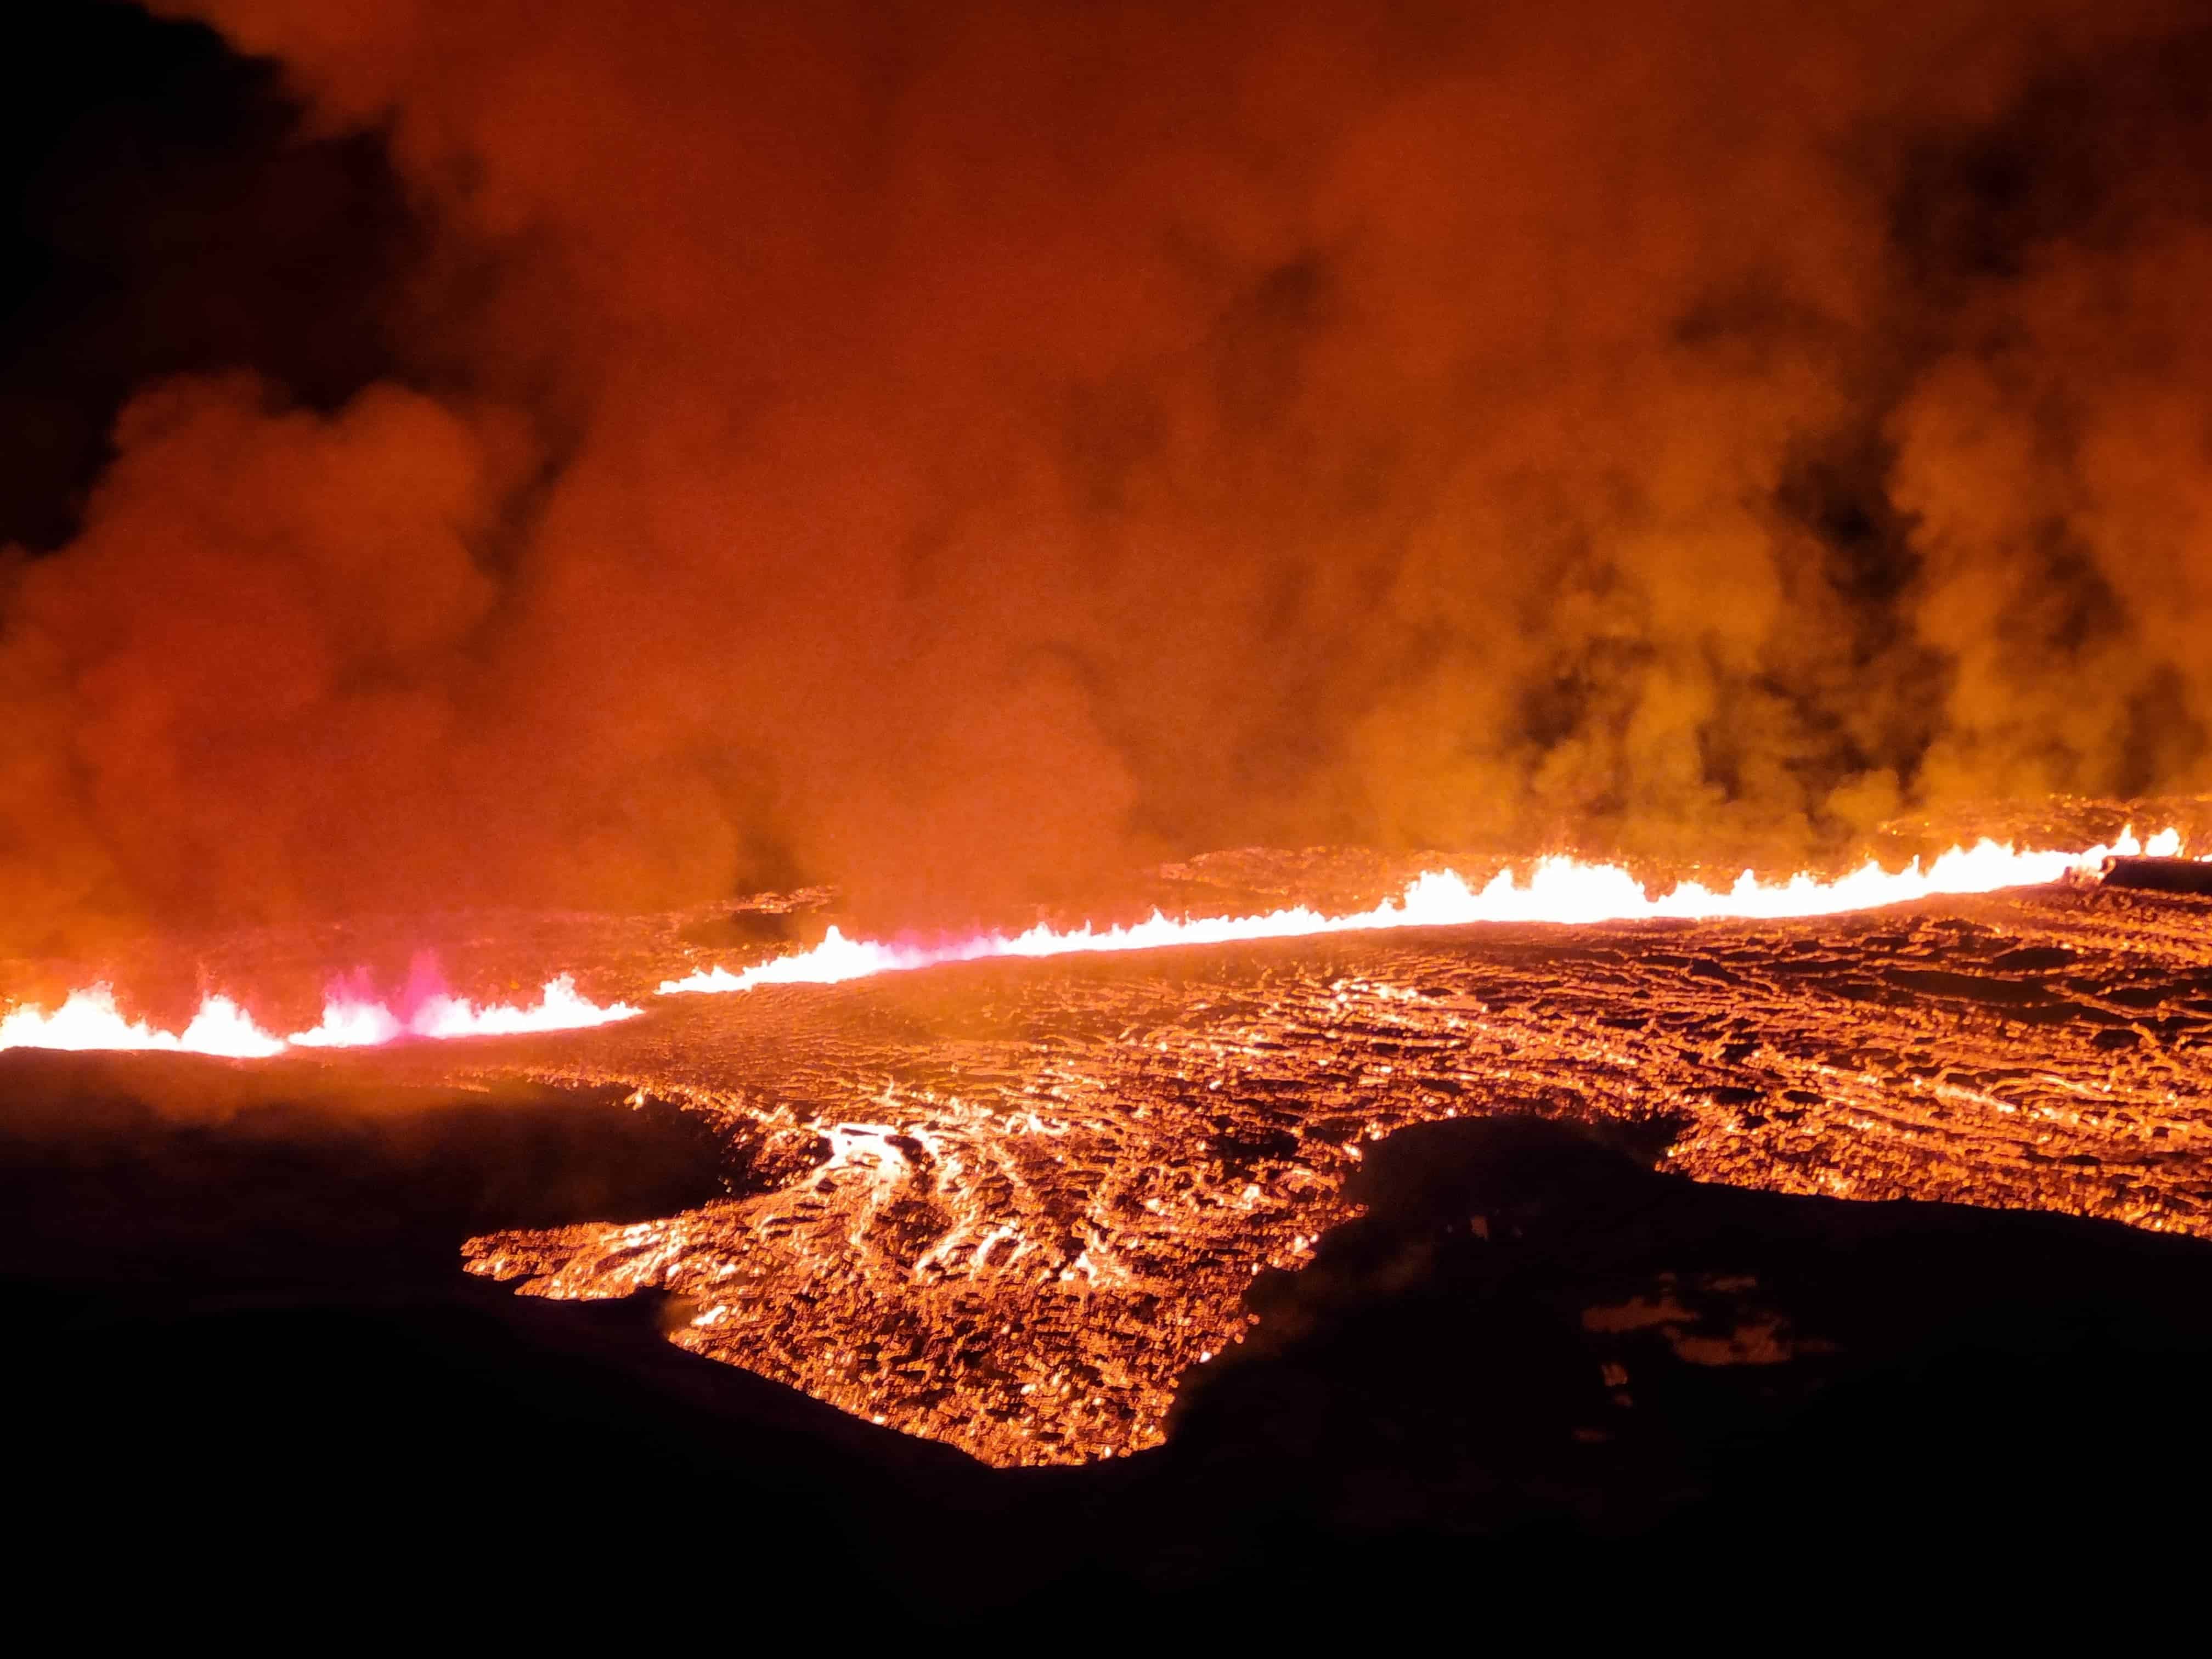 Iceland: Volcano Eruption Sends Lava Into Fishing Town